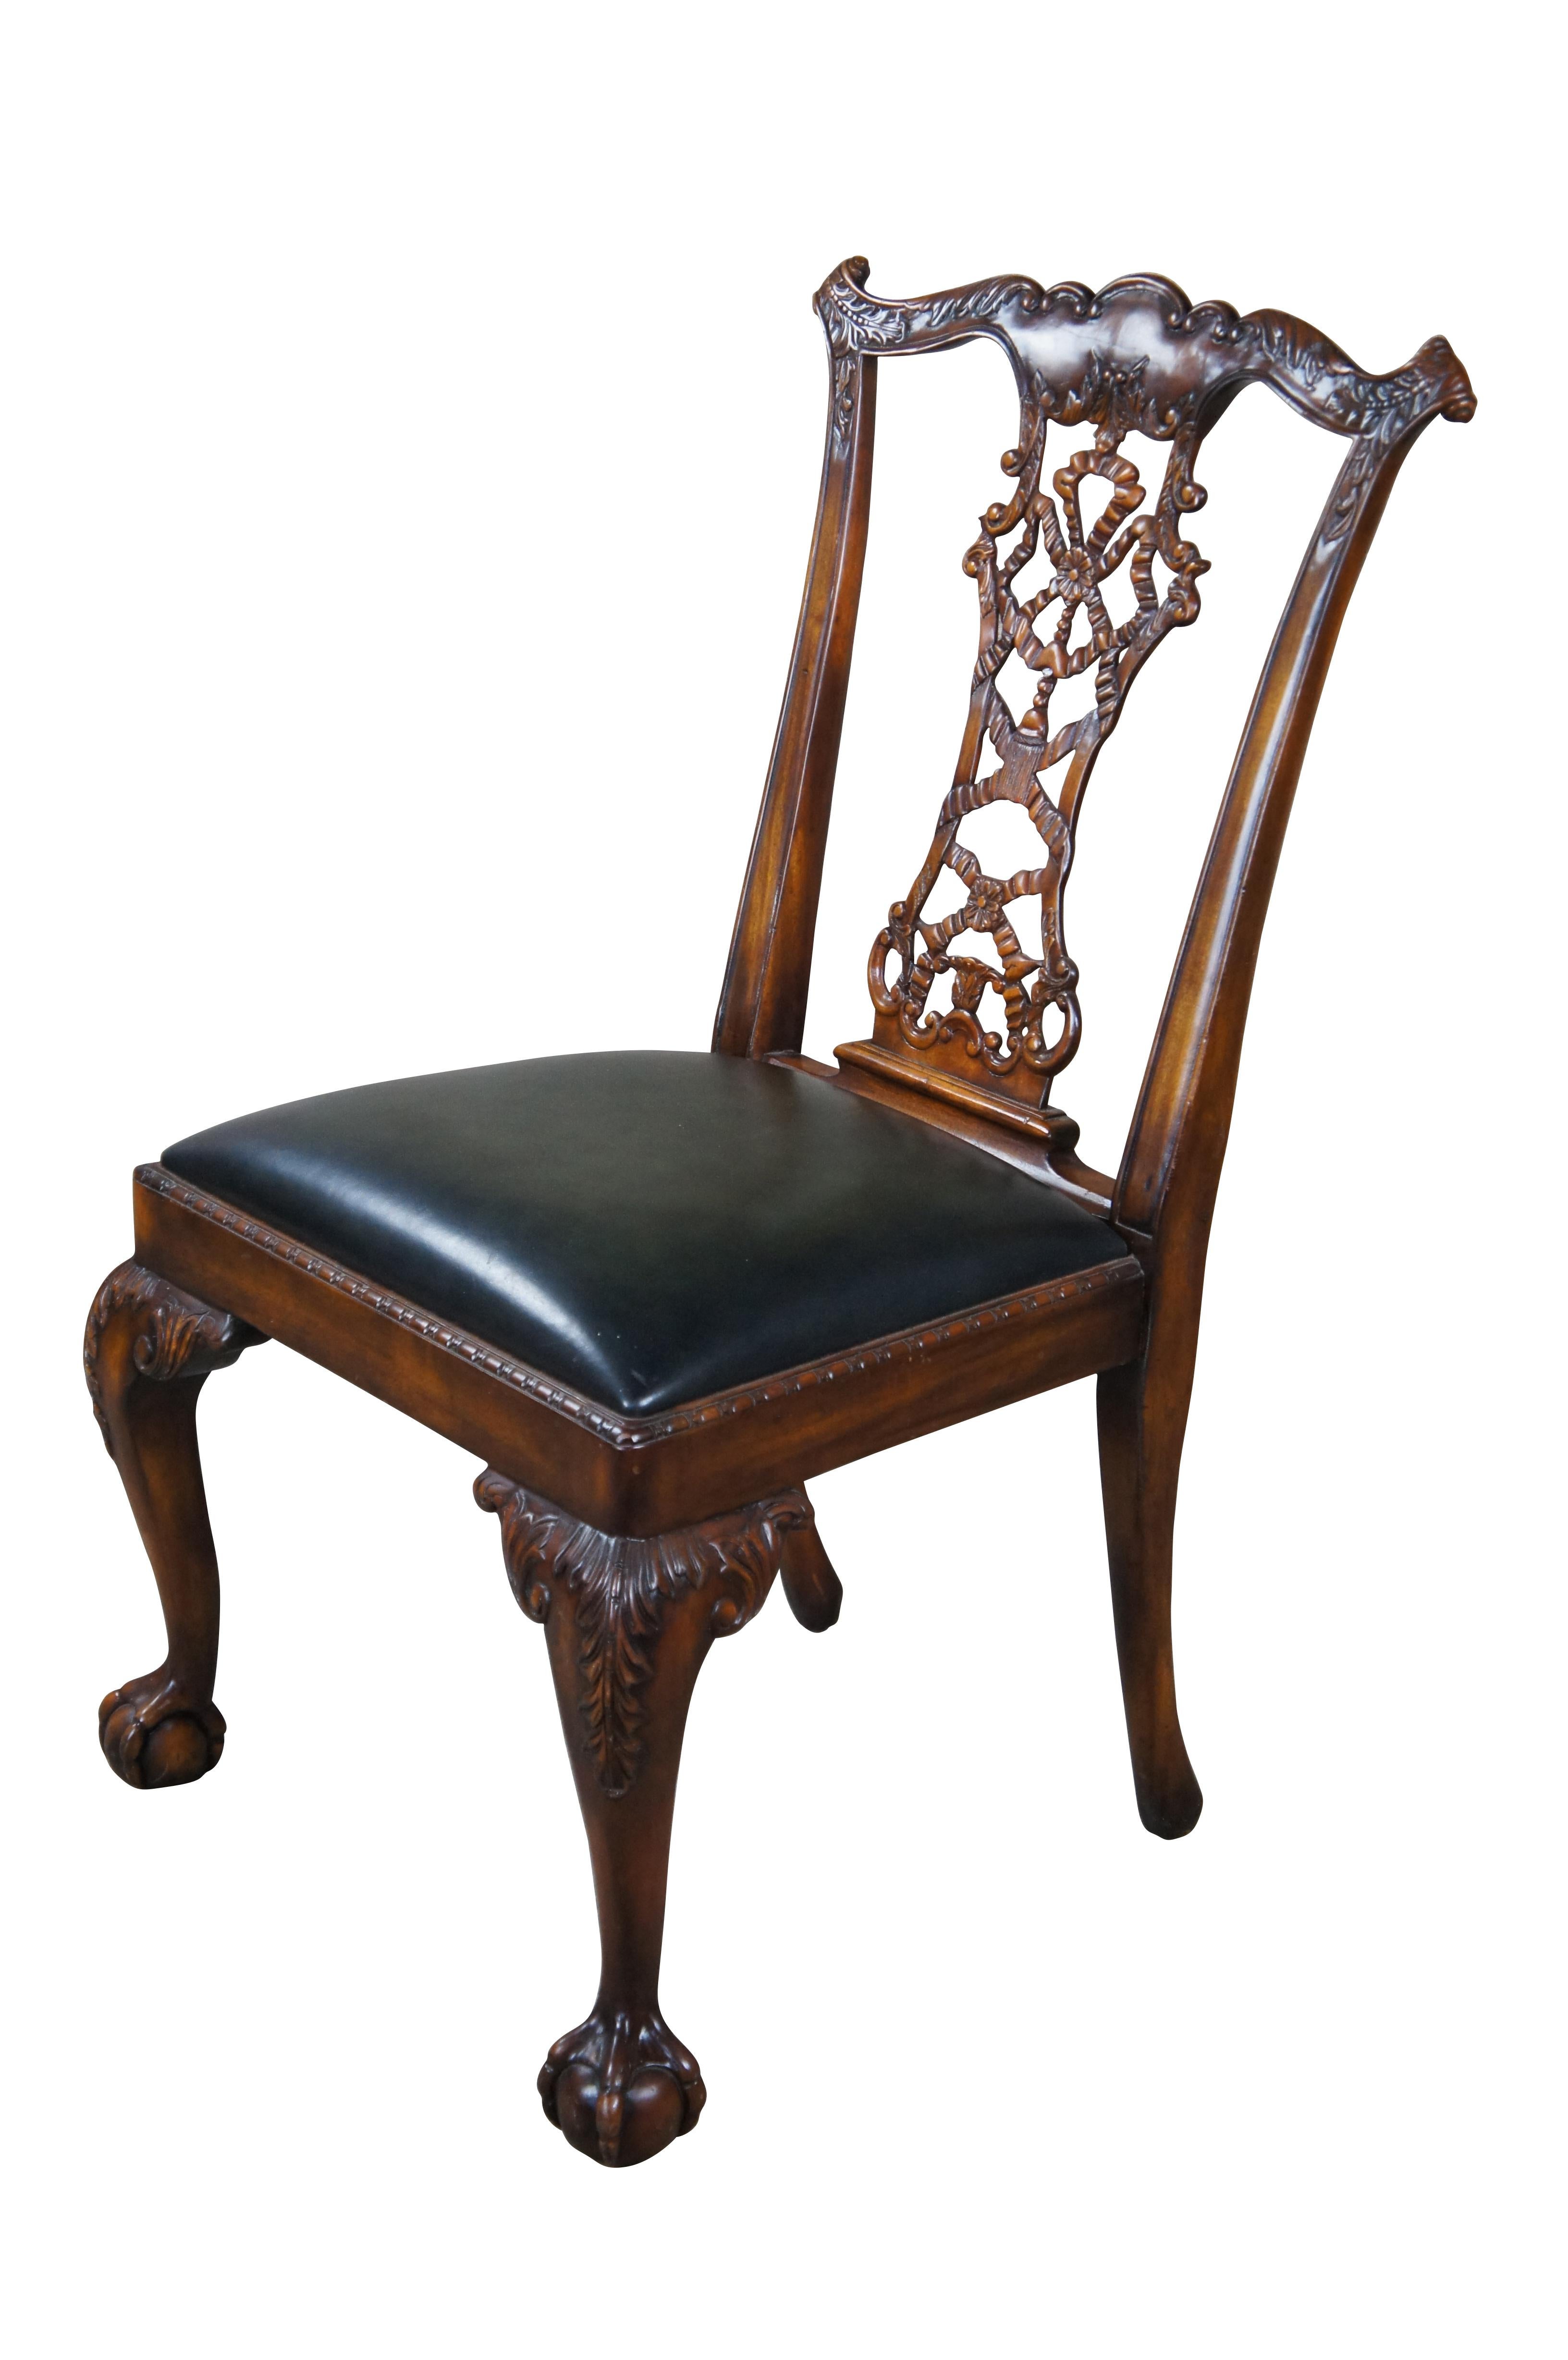 2 Theodore Alexander English Chippendale Carved Mahogany Leather Dining Chairs  In Good Condition For Sale In Dayton, OH